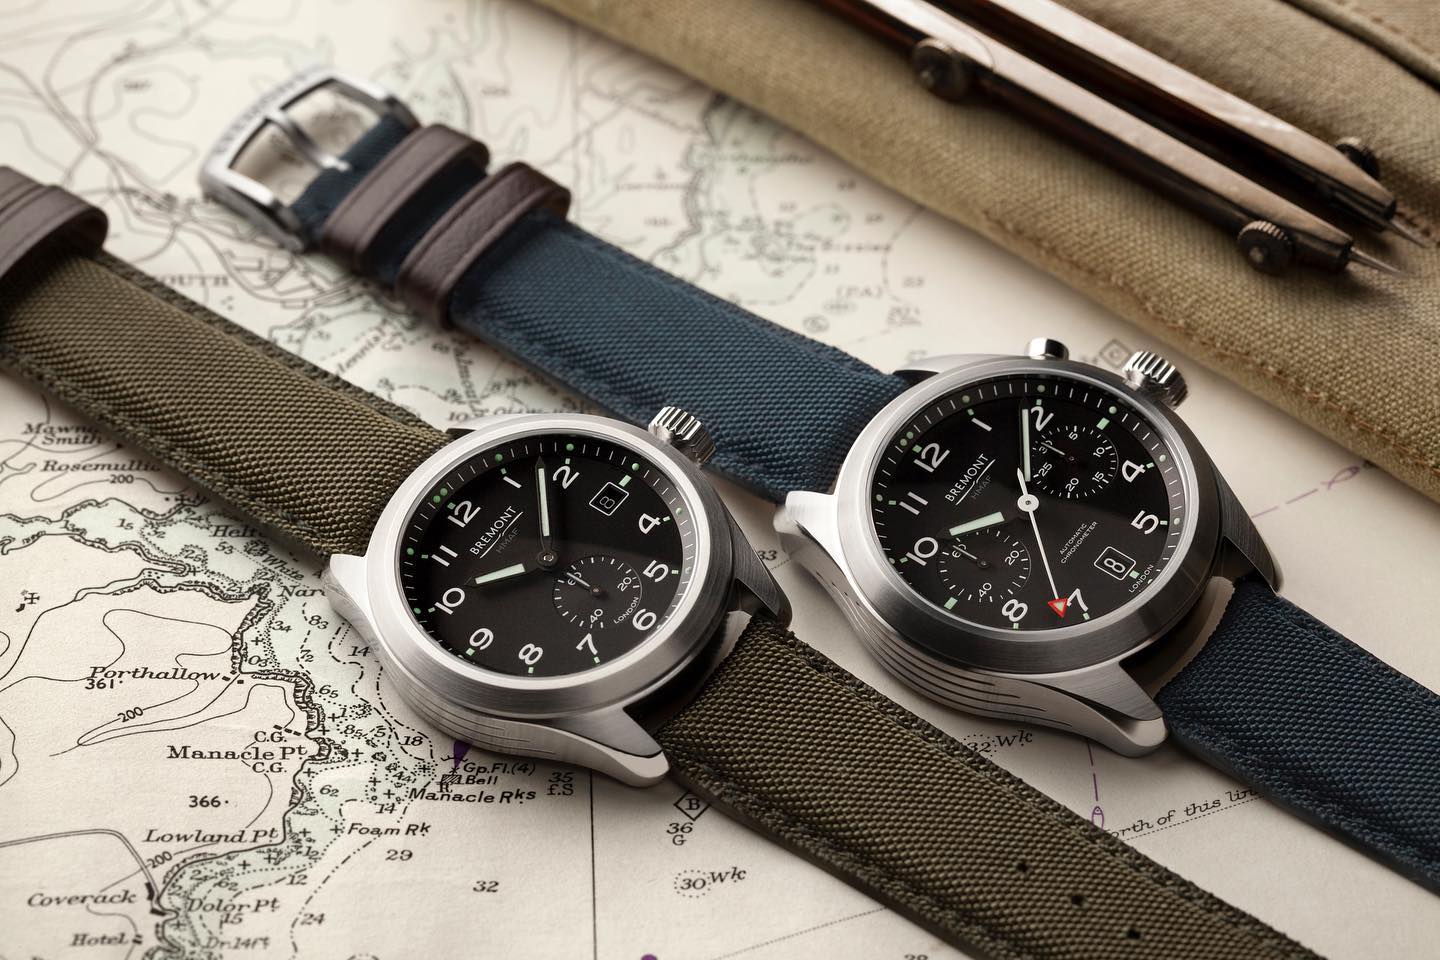 Authorised Dealer for Bremont Watches | G Hewitt & Son